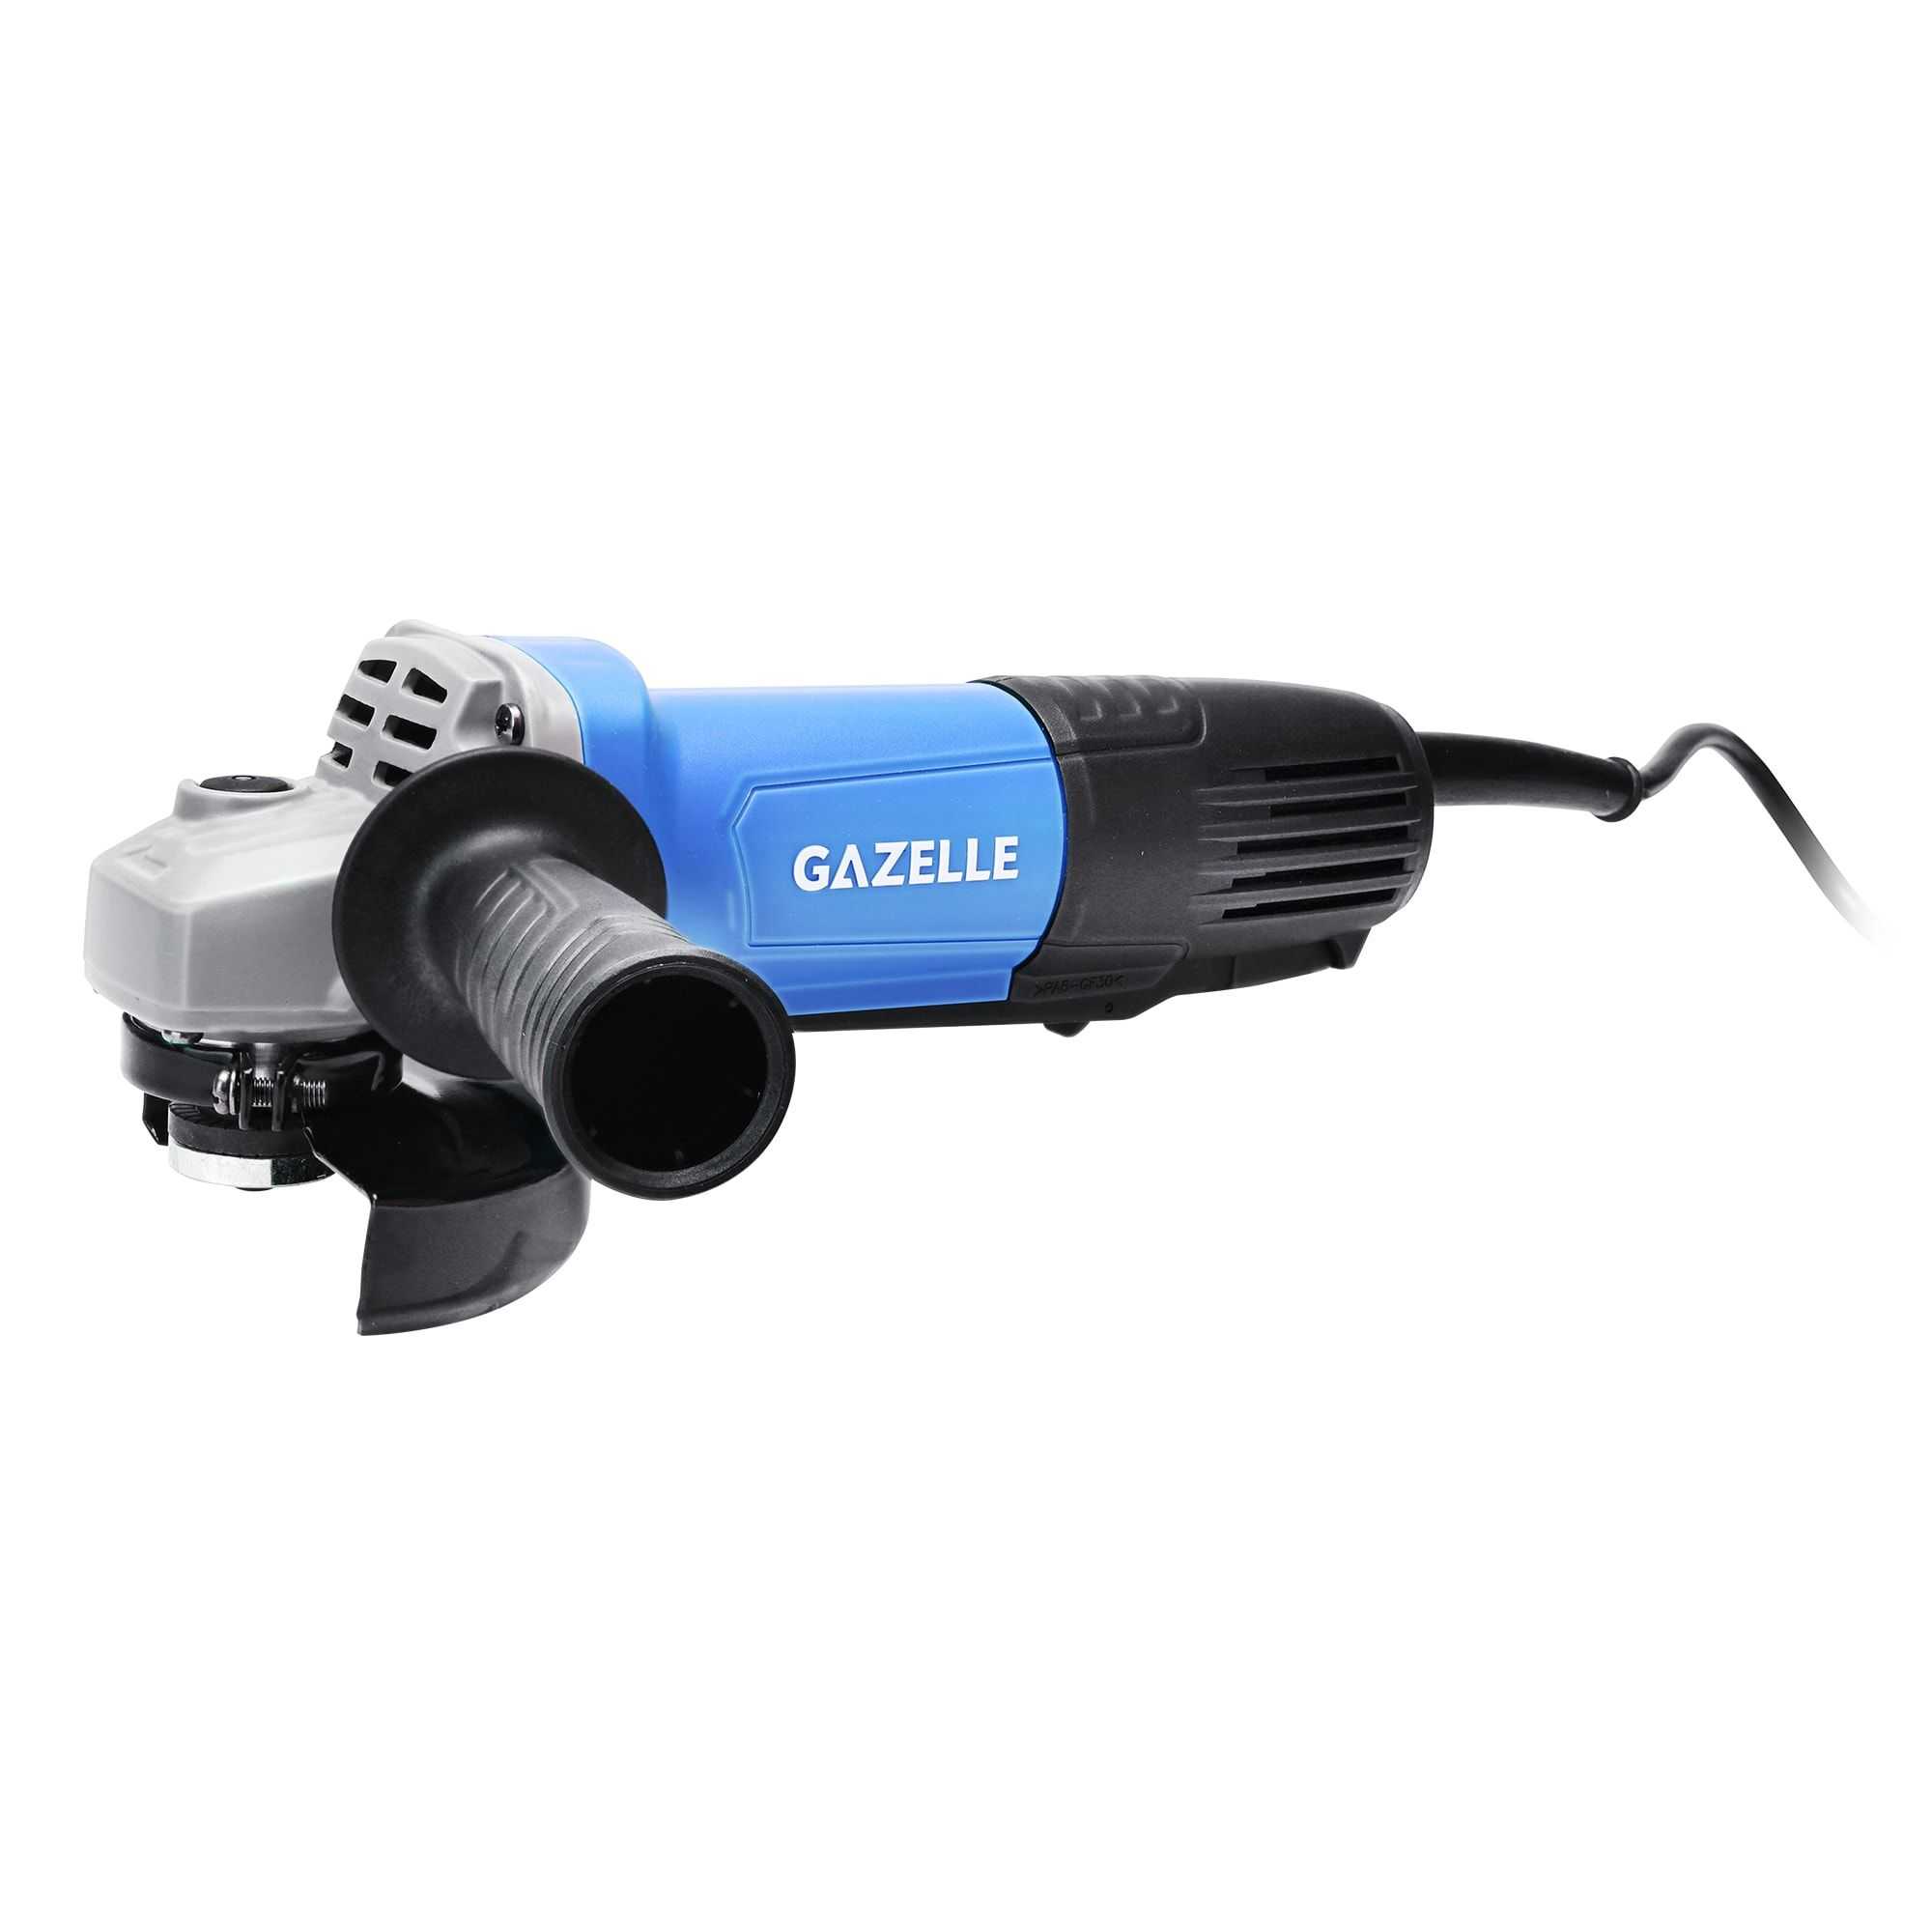 4" Angle Grinder 800W Paddle Switch